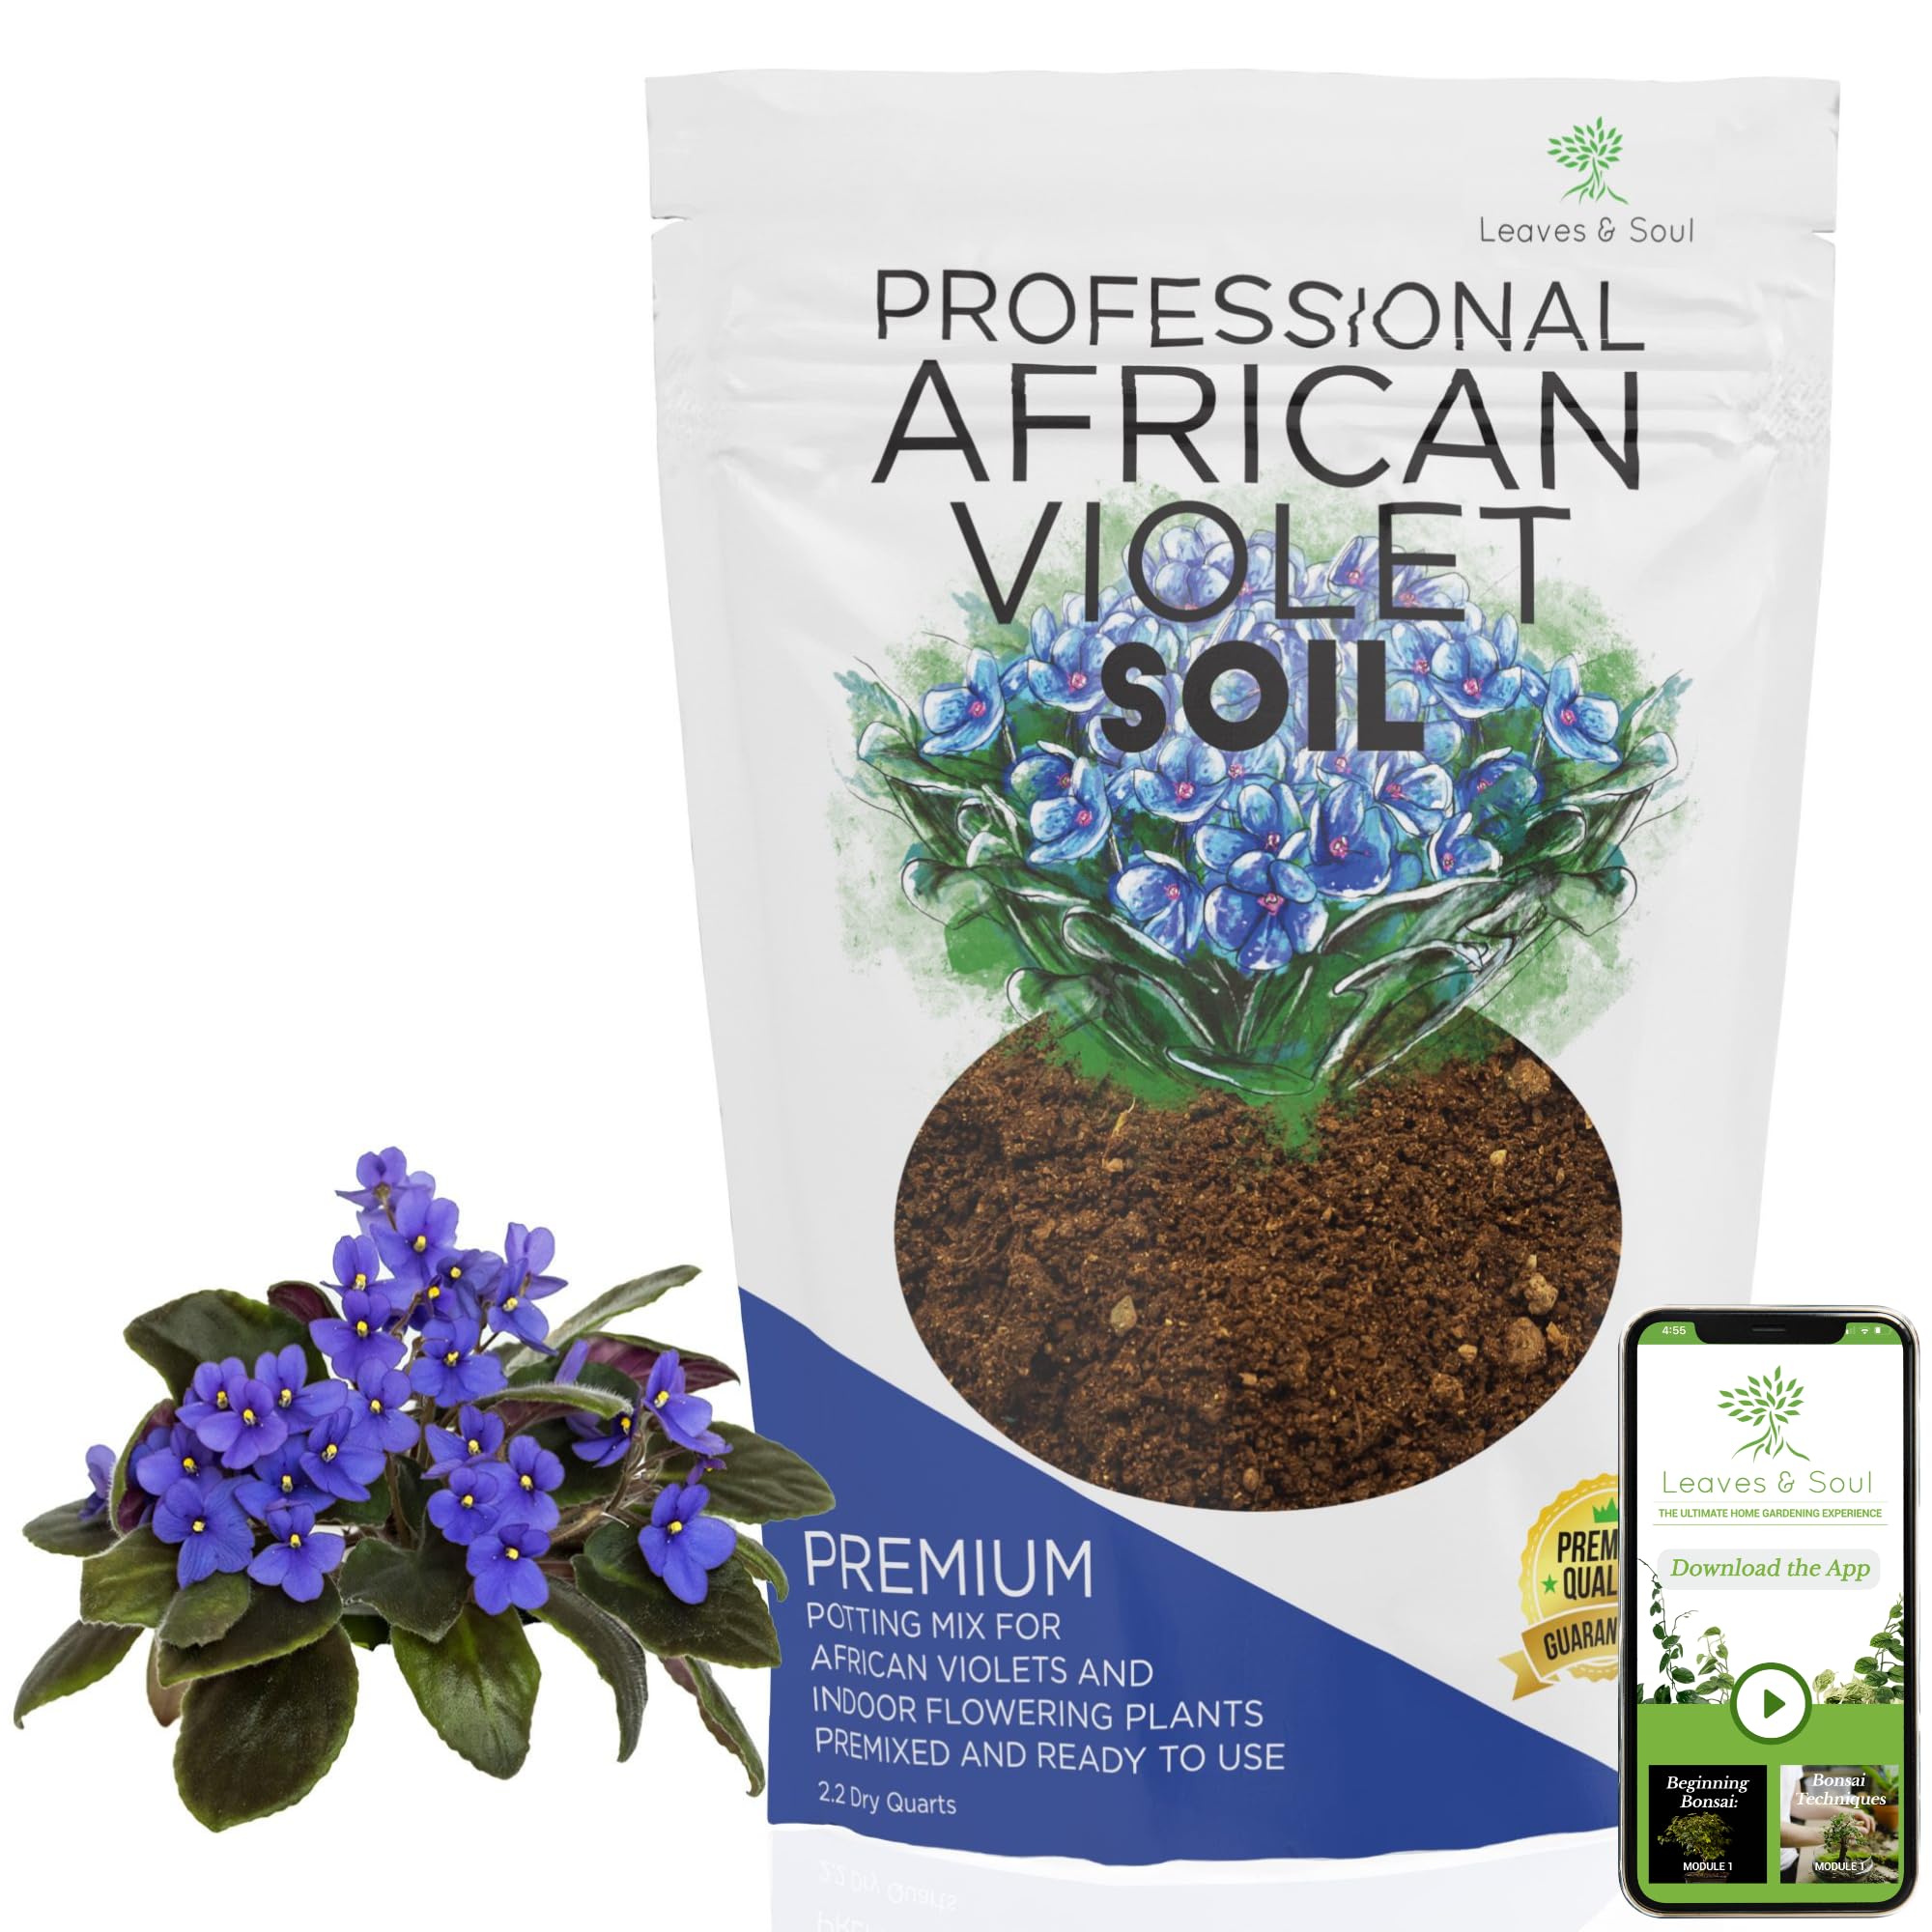 Premium Soil All Purpose Blend | Ready to Use | Extra Large 2.2 Quarts | Made in USA  - Like New